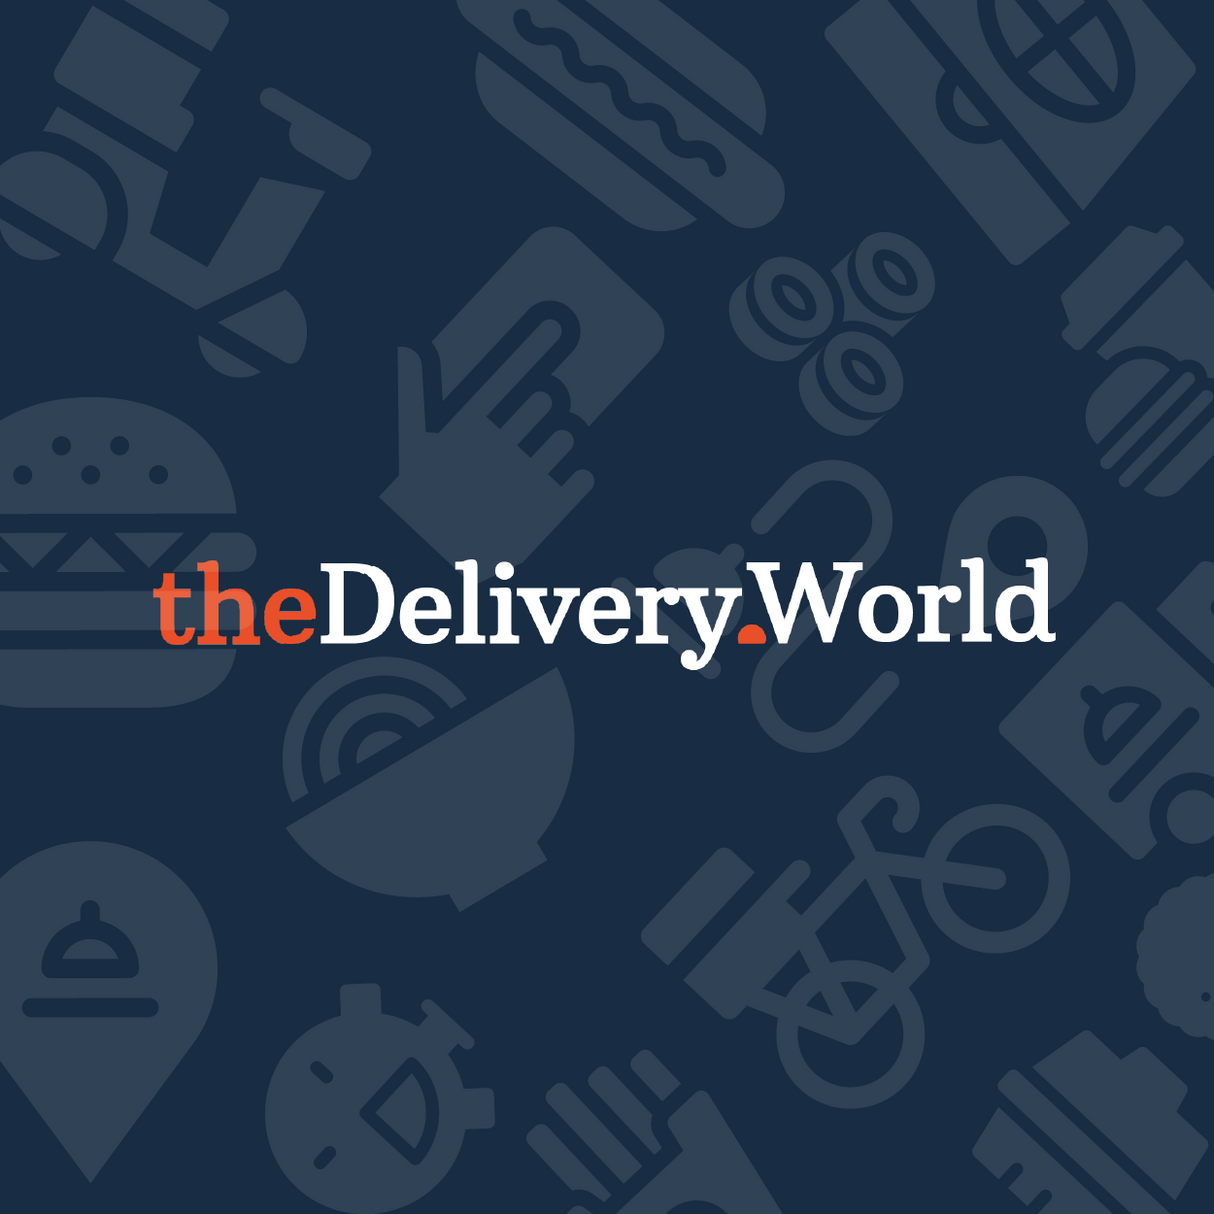 TheDelivery.World